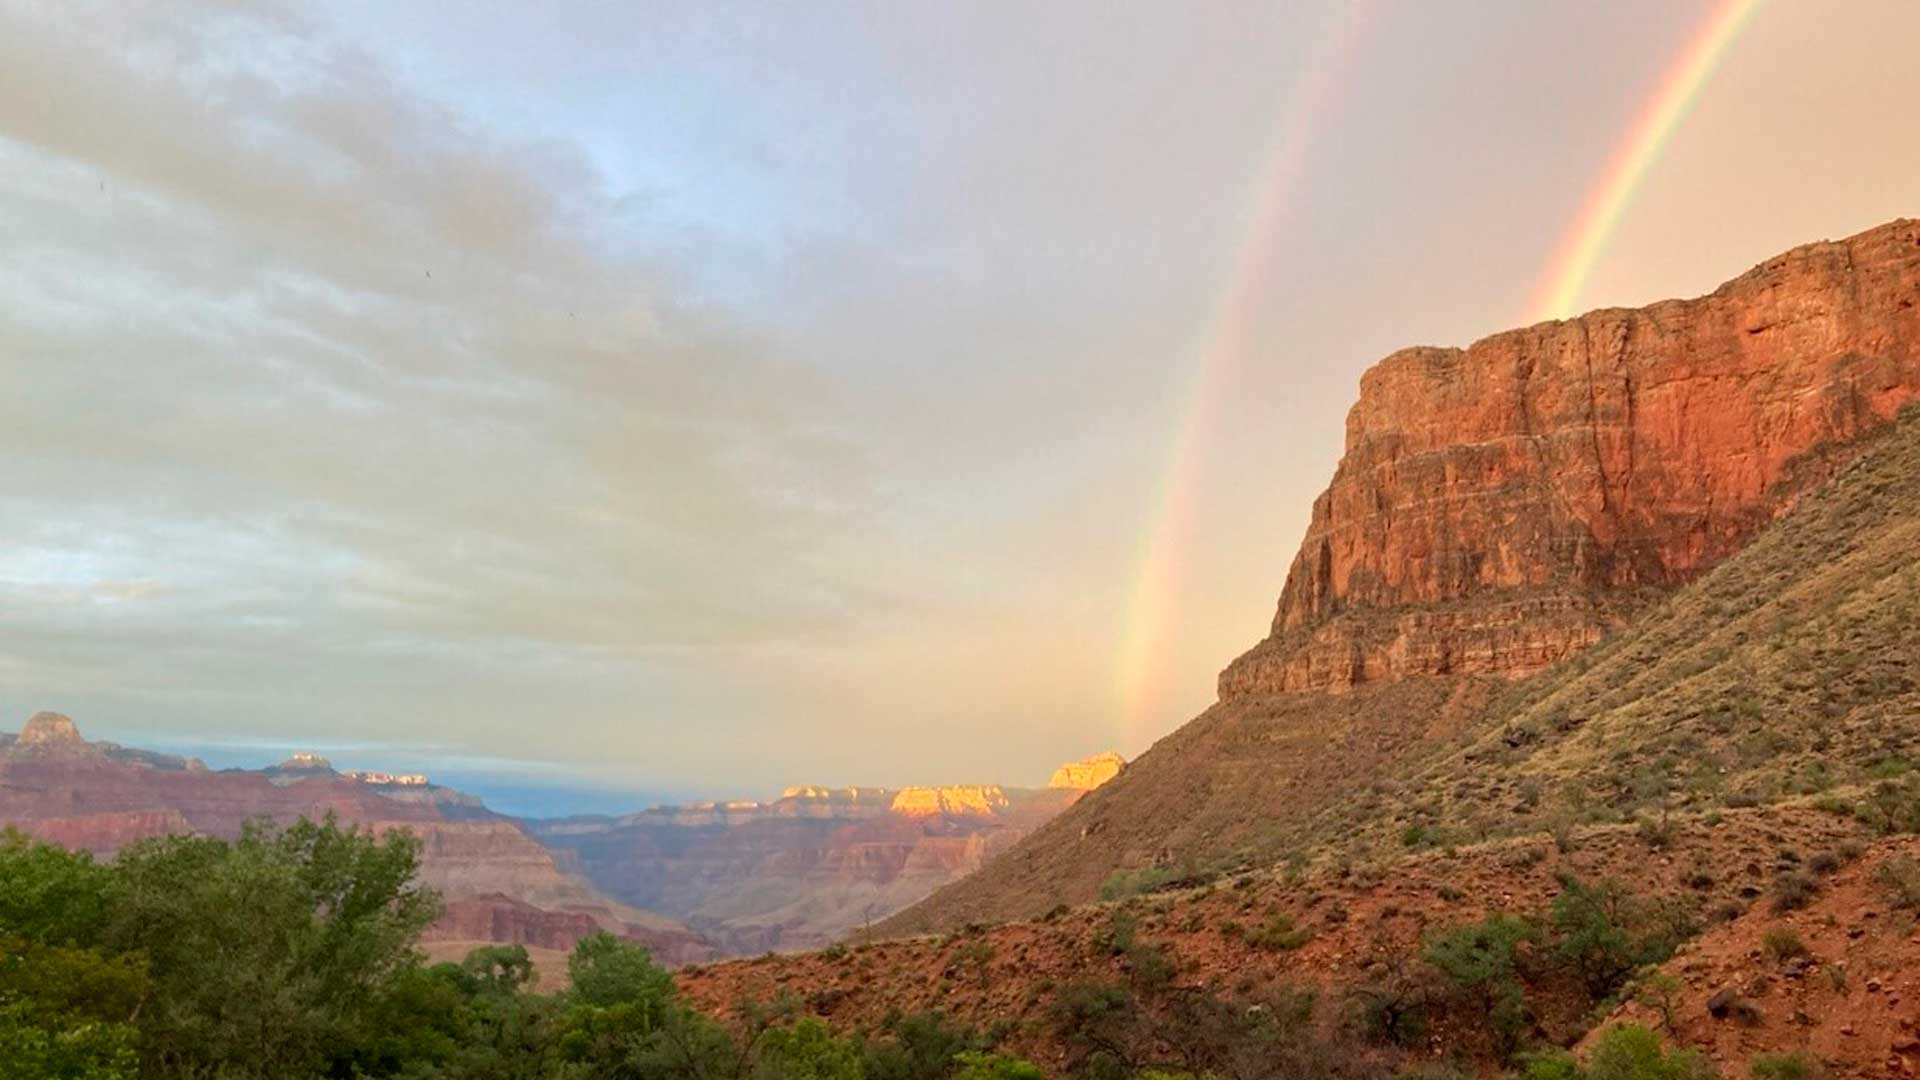 This August 2022 photo provided by the National Park Service shows a double rainbow from the ranger station porch at Indian Garden, which is now called Havasupai Gardens, in Grand Canyon National Park. The Indian Garden name assigned to a popular Grand Canyon campground has been changed out of respect for a Native American tribe that was displaced by the national park. The Havasupai Tribe and Grand Canyon National Park announced Monday, Nov. 21, that Indian Garden will be renamed Havasupai Gardens.